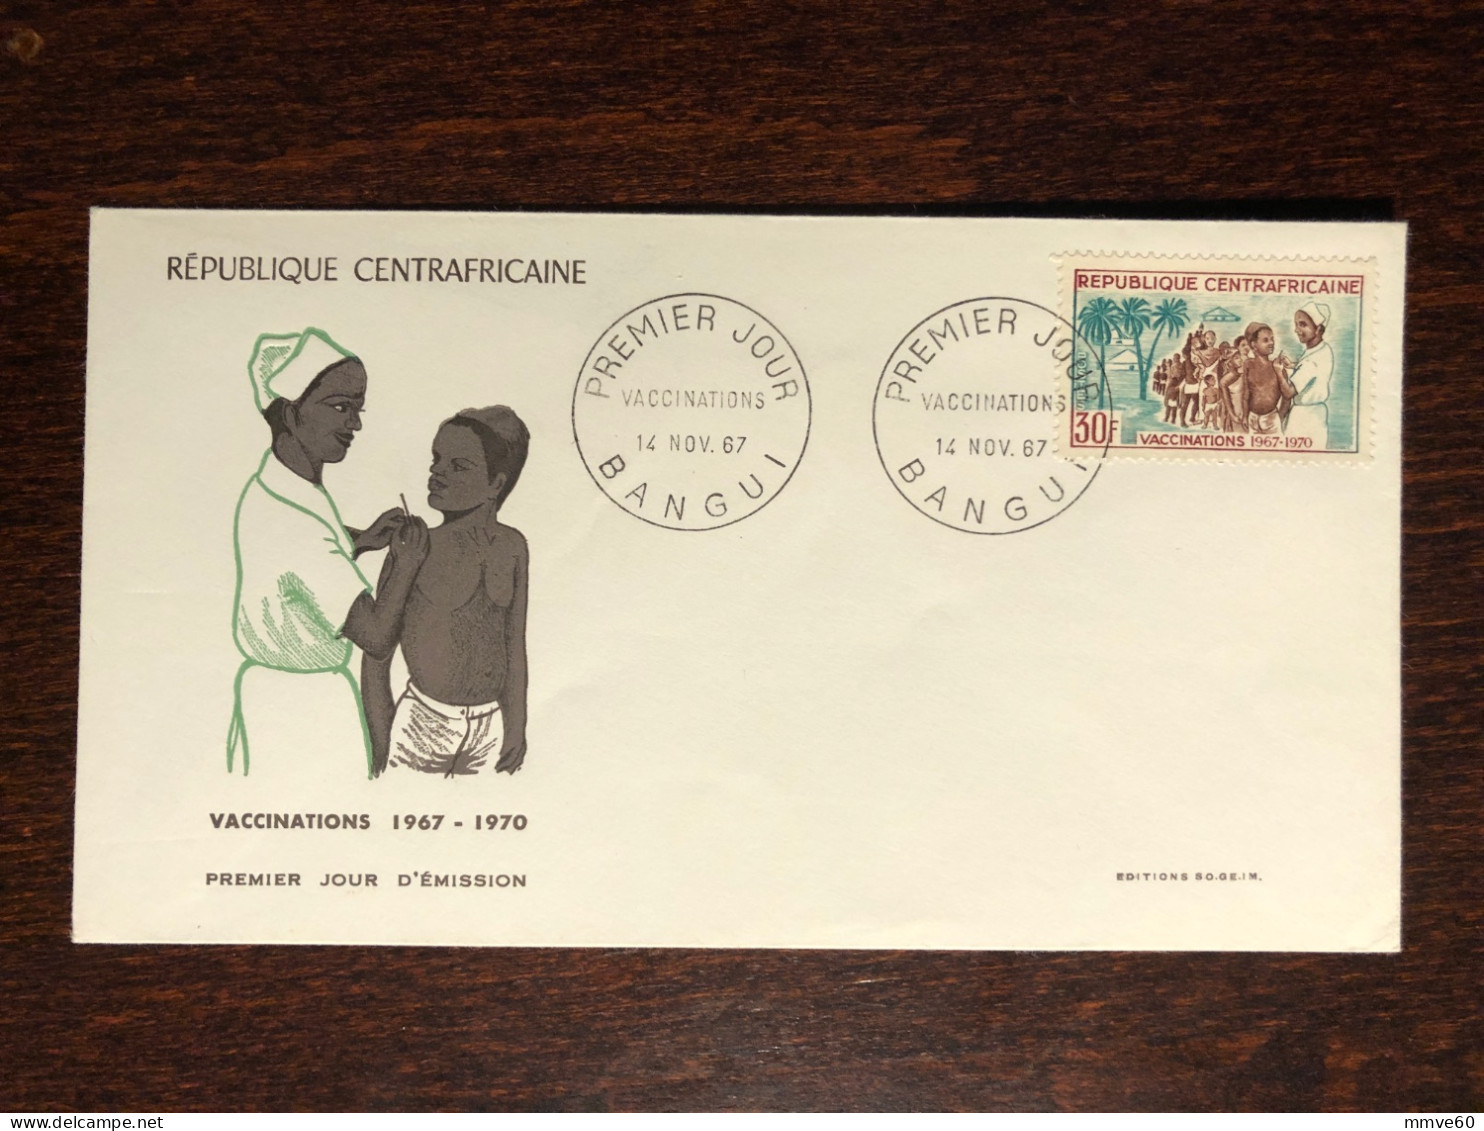 CENTRAFRICAINE CENTRAL AFRICA FDC COVER 1967 YEAR  VACCINATION HEALTH MEDICINE STAMPS - Repubblica Centroafricana